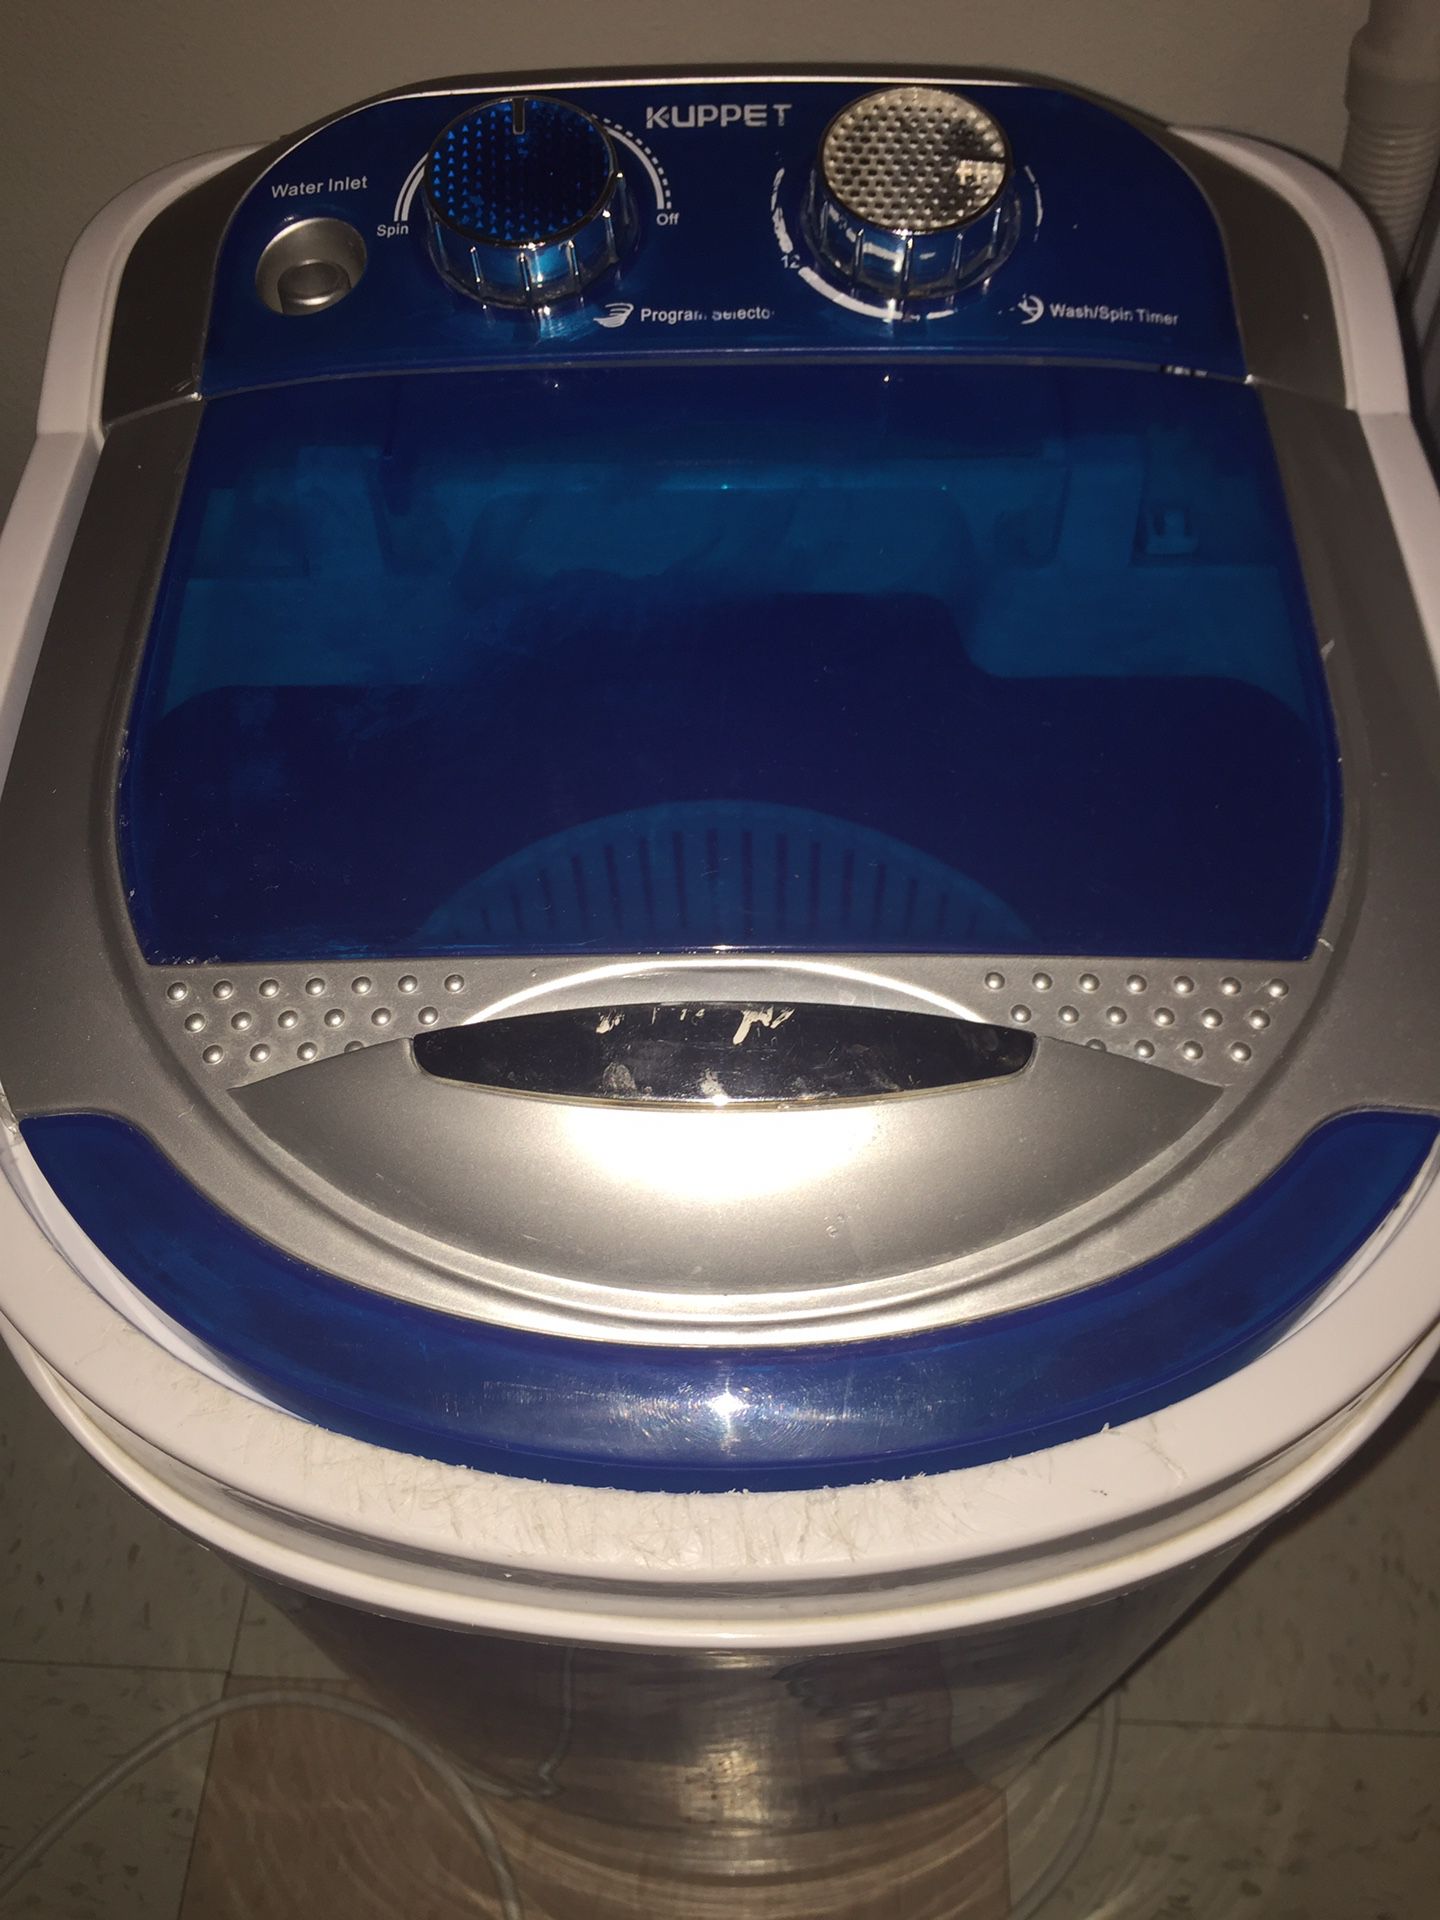 PLEASE READ AND LOOK AT PICTURES Very small KUPPET Portable Washer/spinner good for RV’S, Small apartments, gd for camping, very small can carry